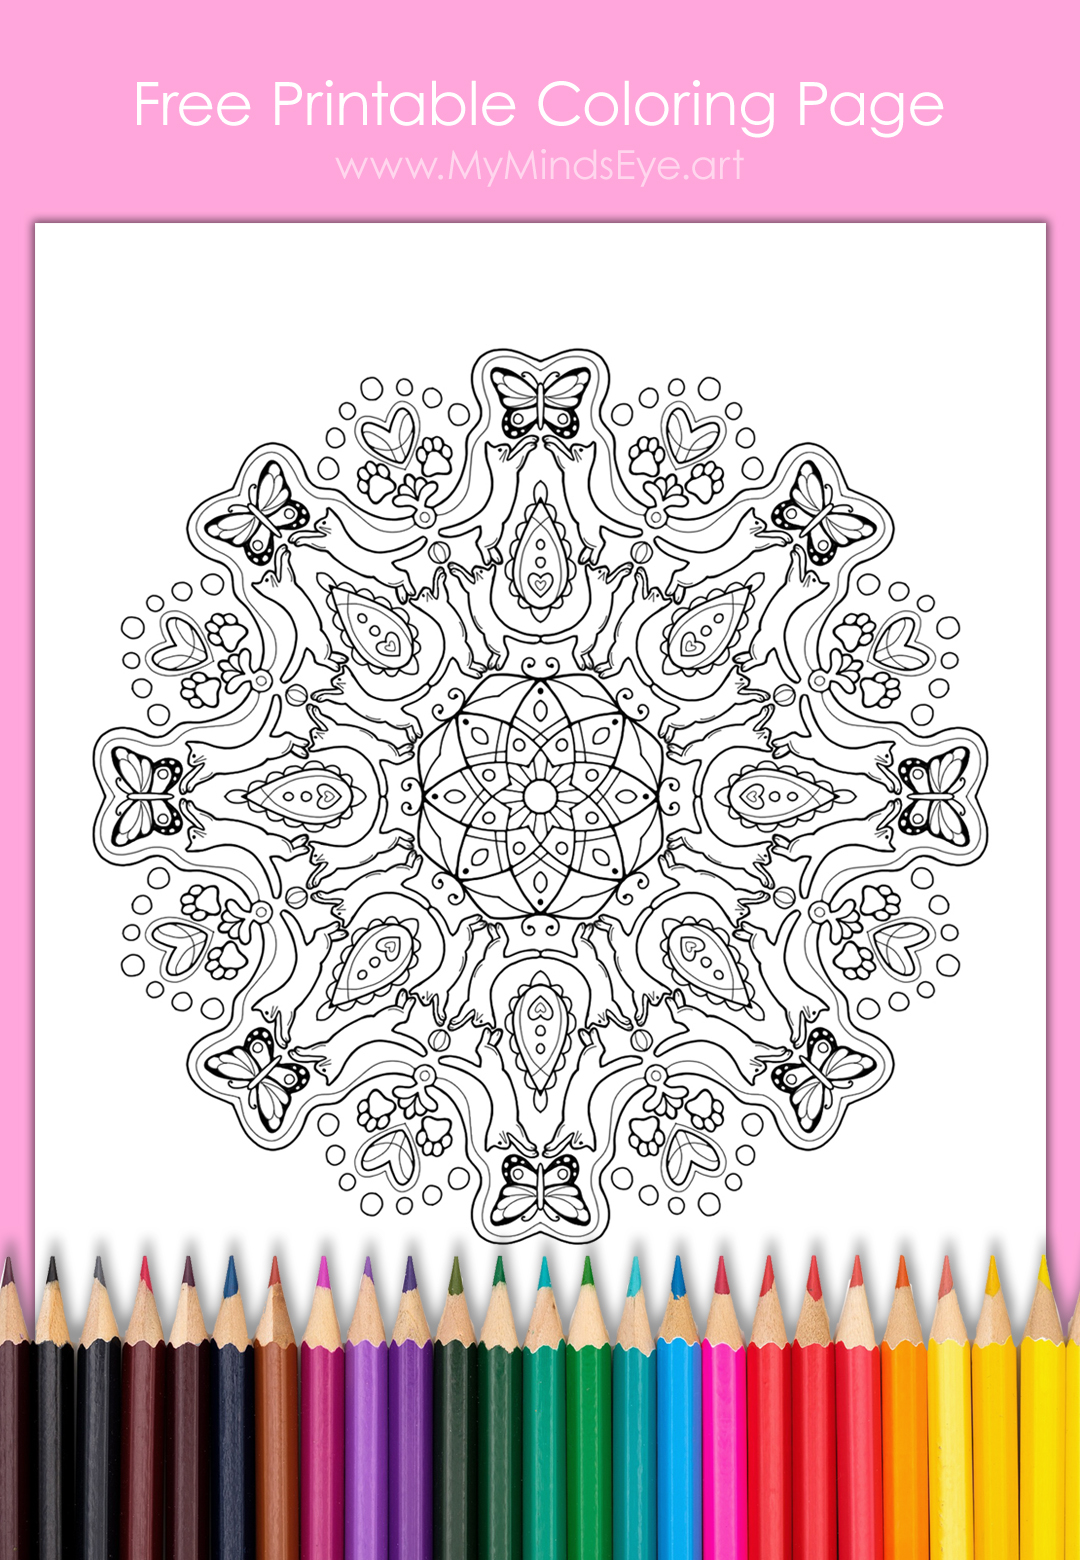 Image of a coloring page of a playful cats mandala.